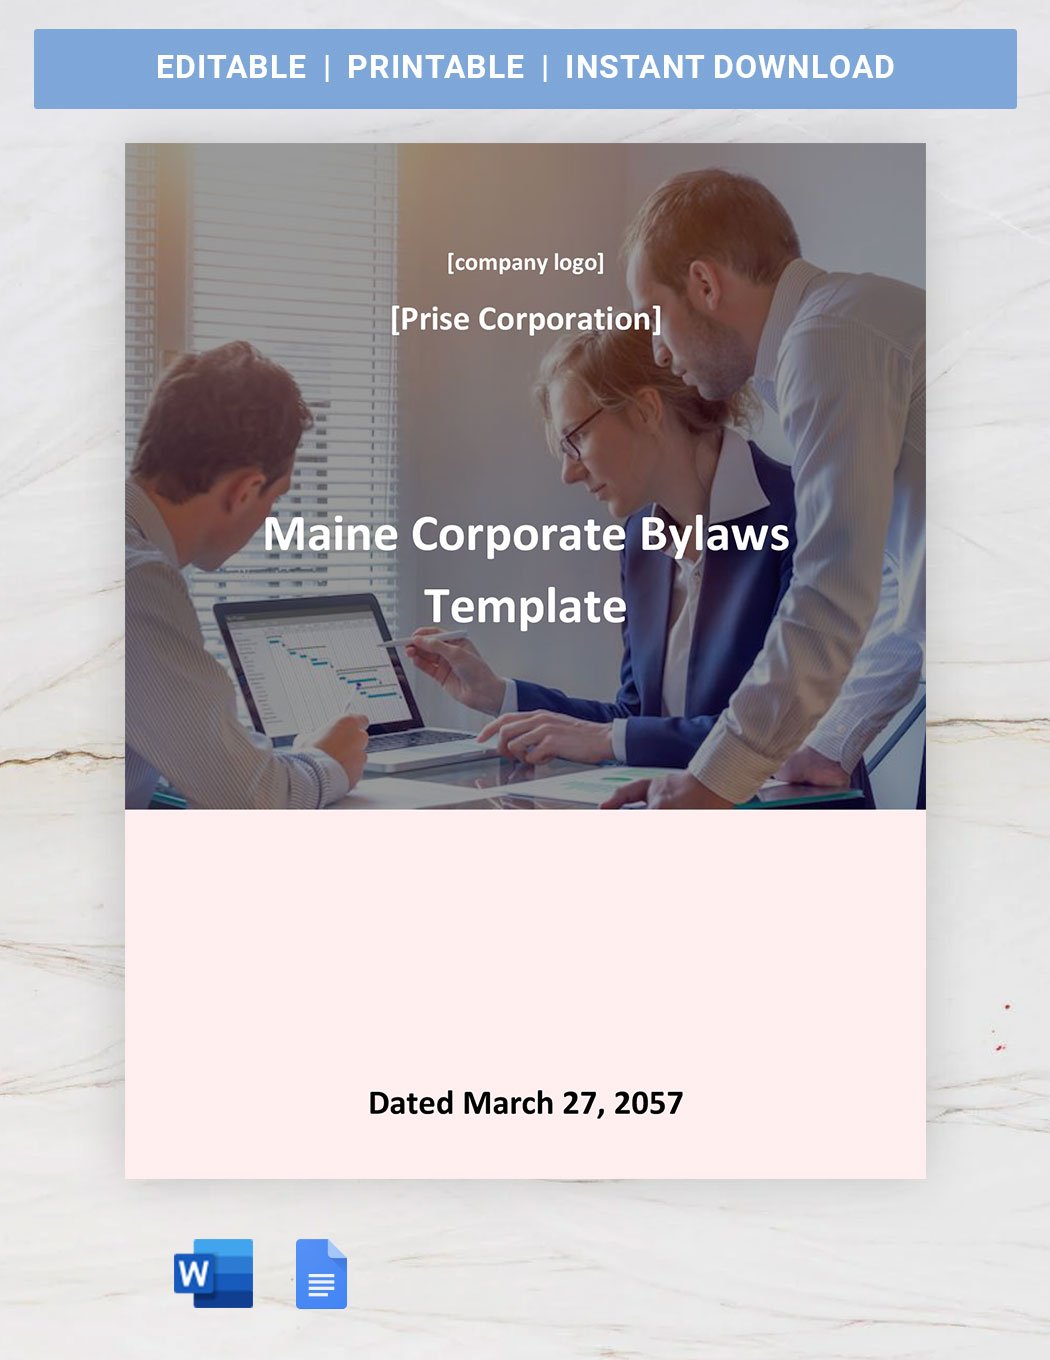 Michigan Corporate Bylaws Template in Word, Google Docs